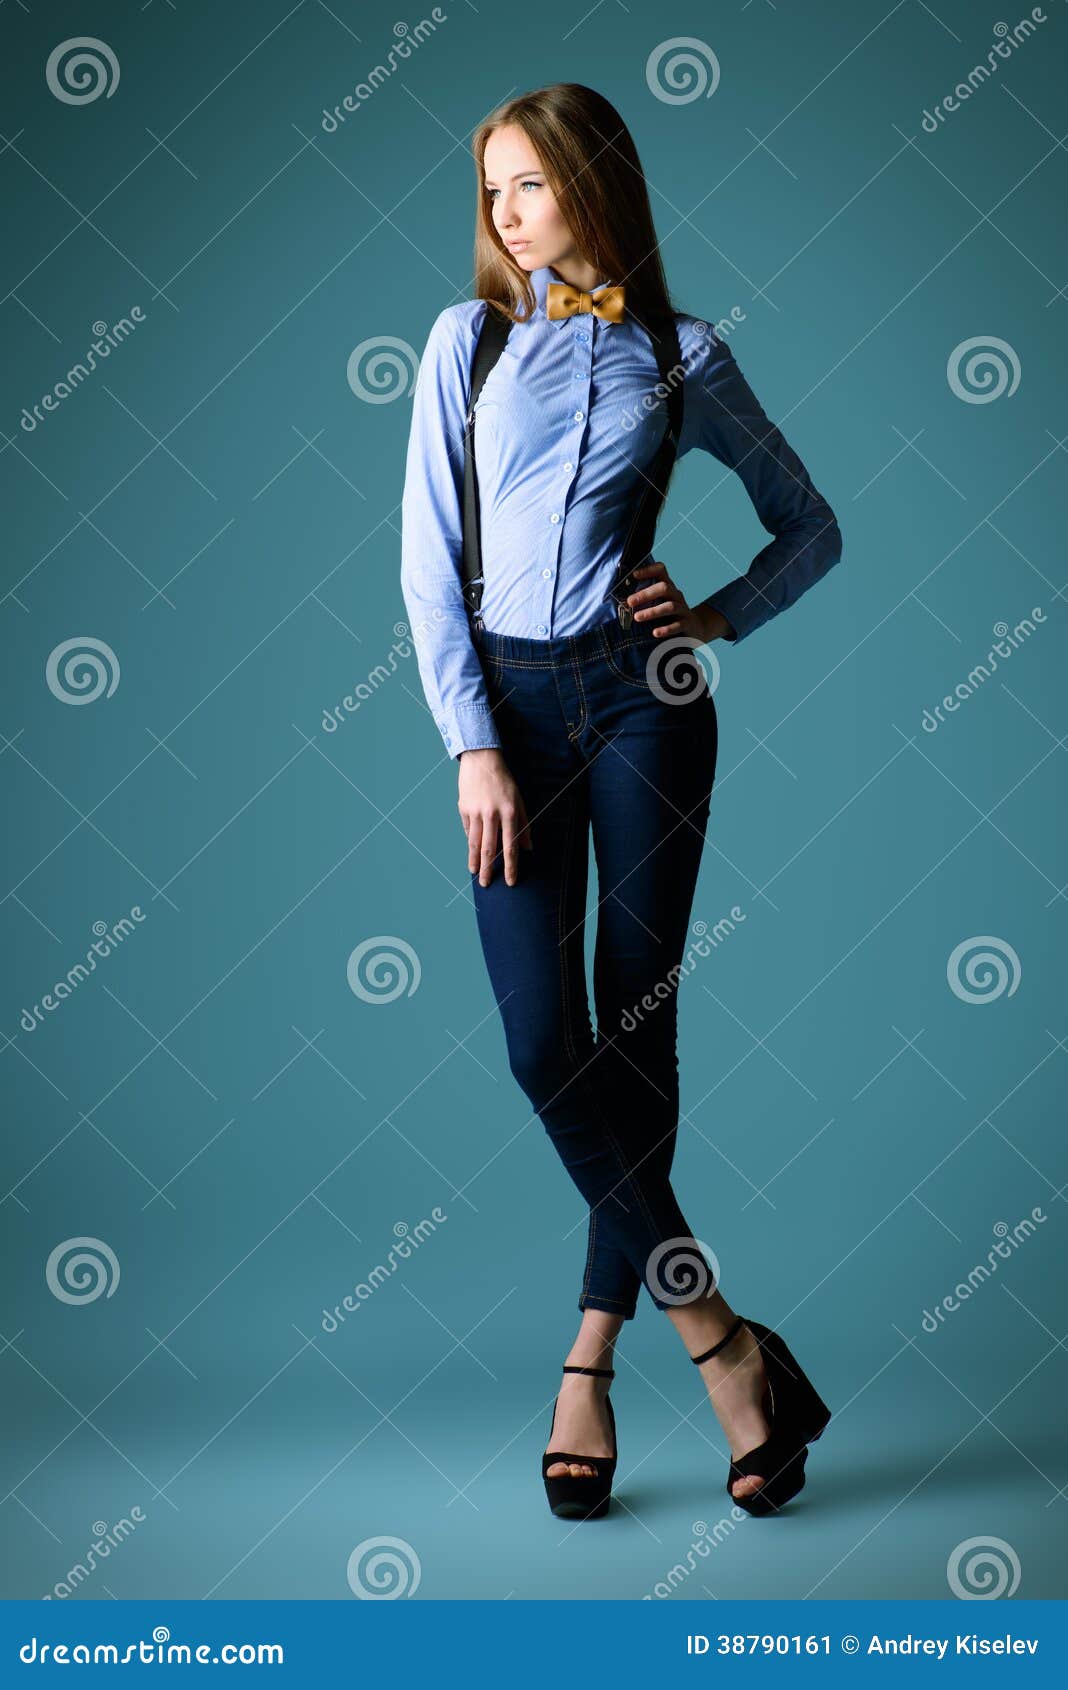 Full length body Free Stock Photos, Images, and Pictures of Full length body